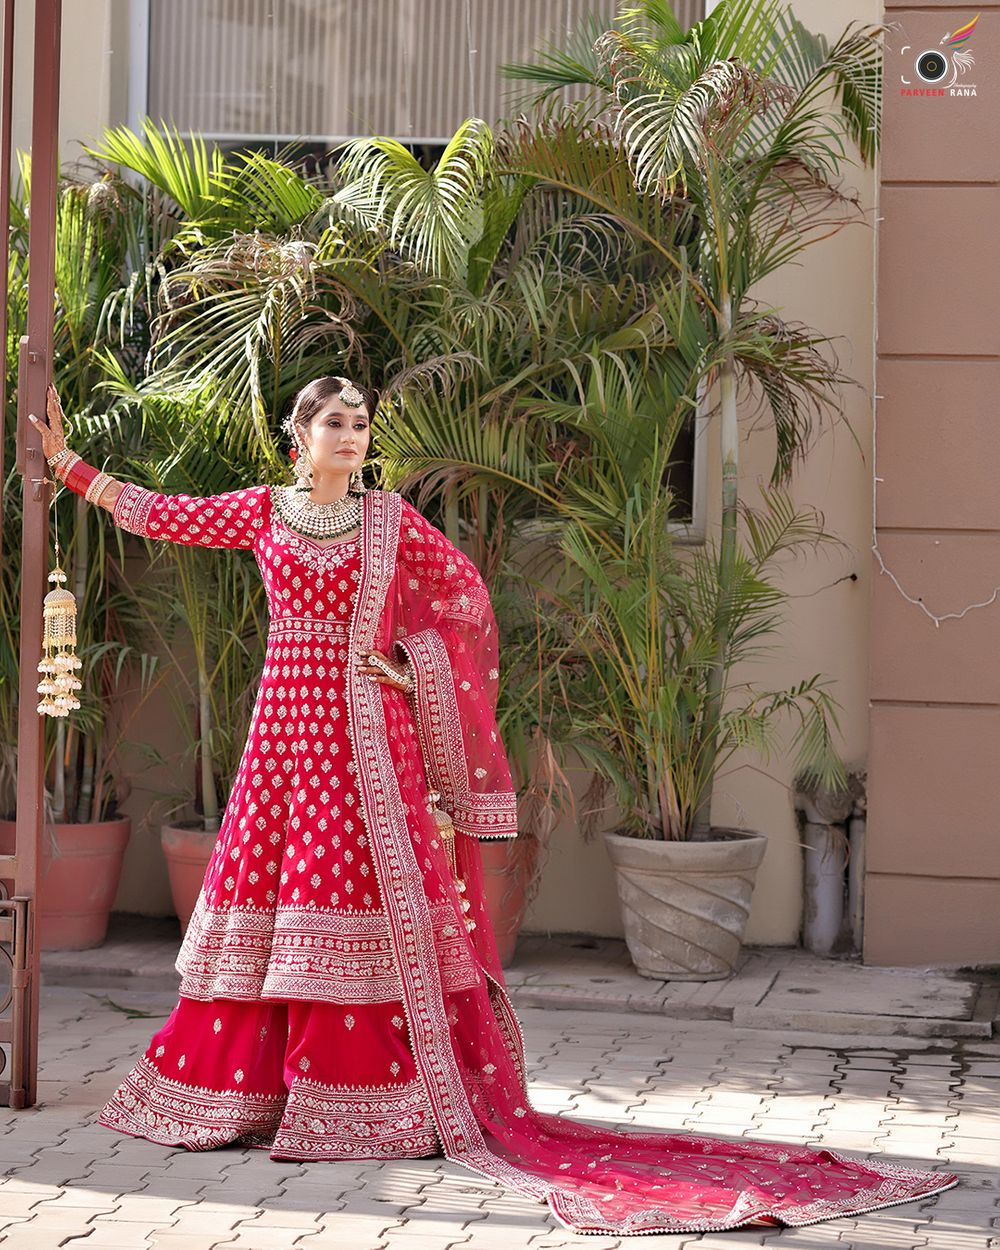 Photo From Brides - By Parveen Rana Photography